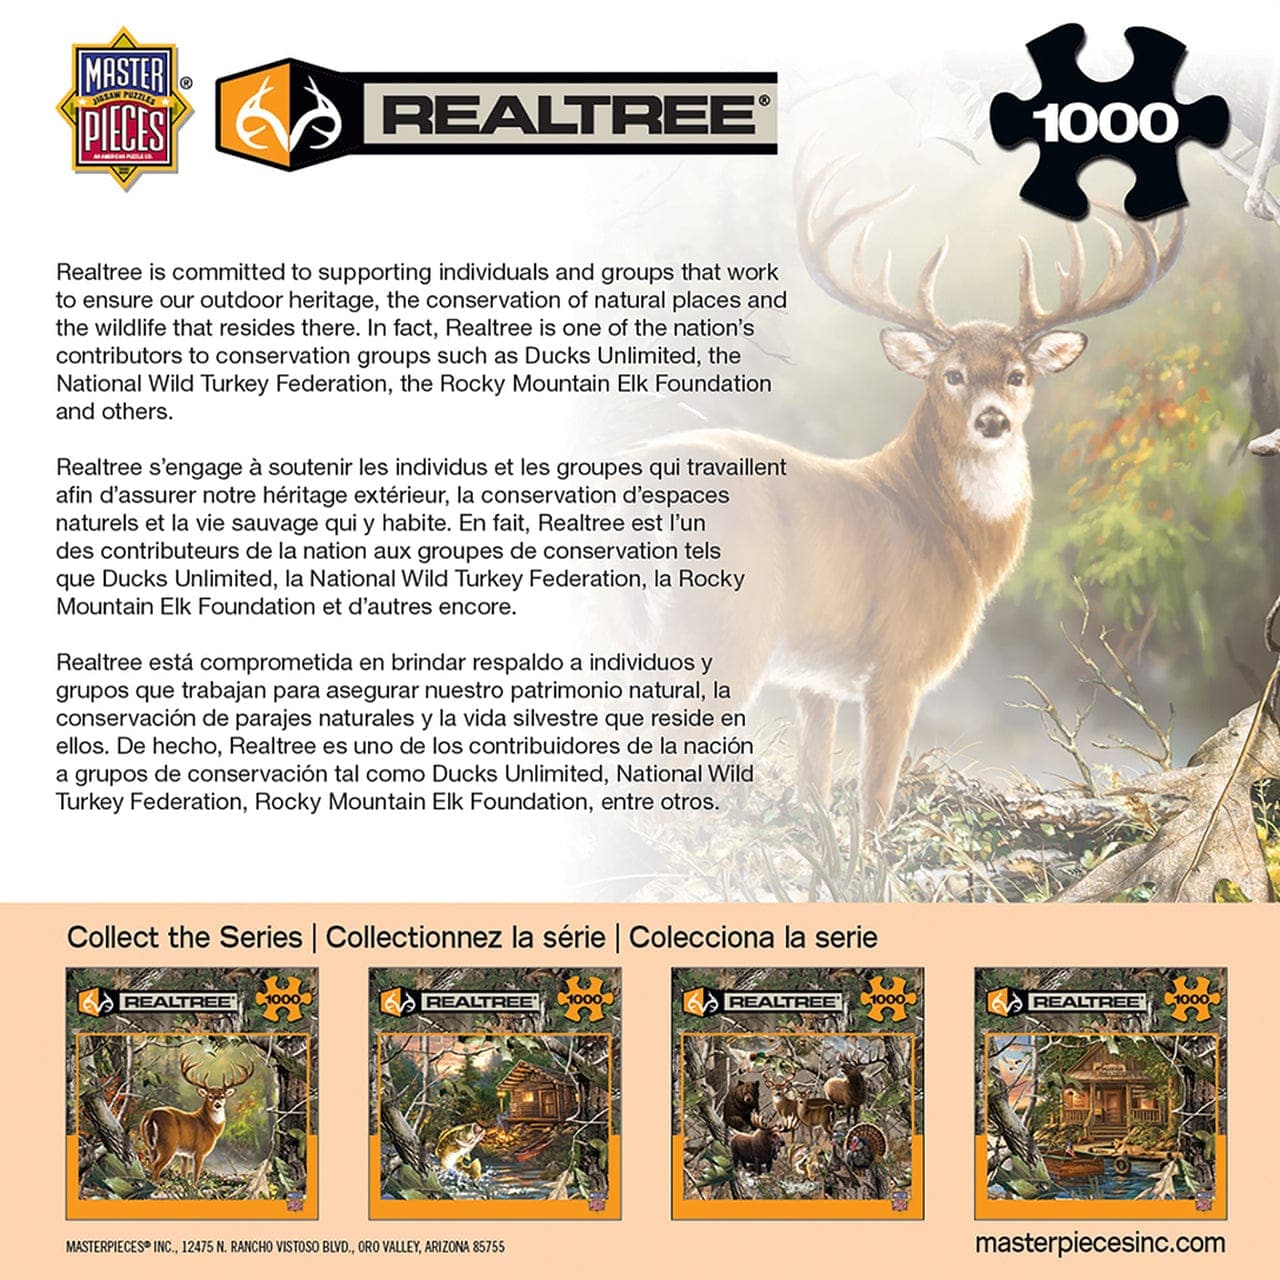 MasterPieces-Realtree - Backcountry Buck - 1000 Piece Puzzle-71751-Legacy Toys